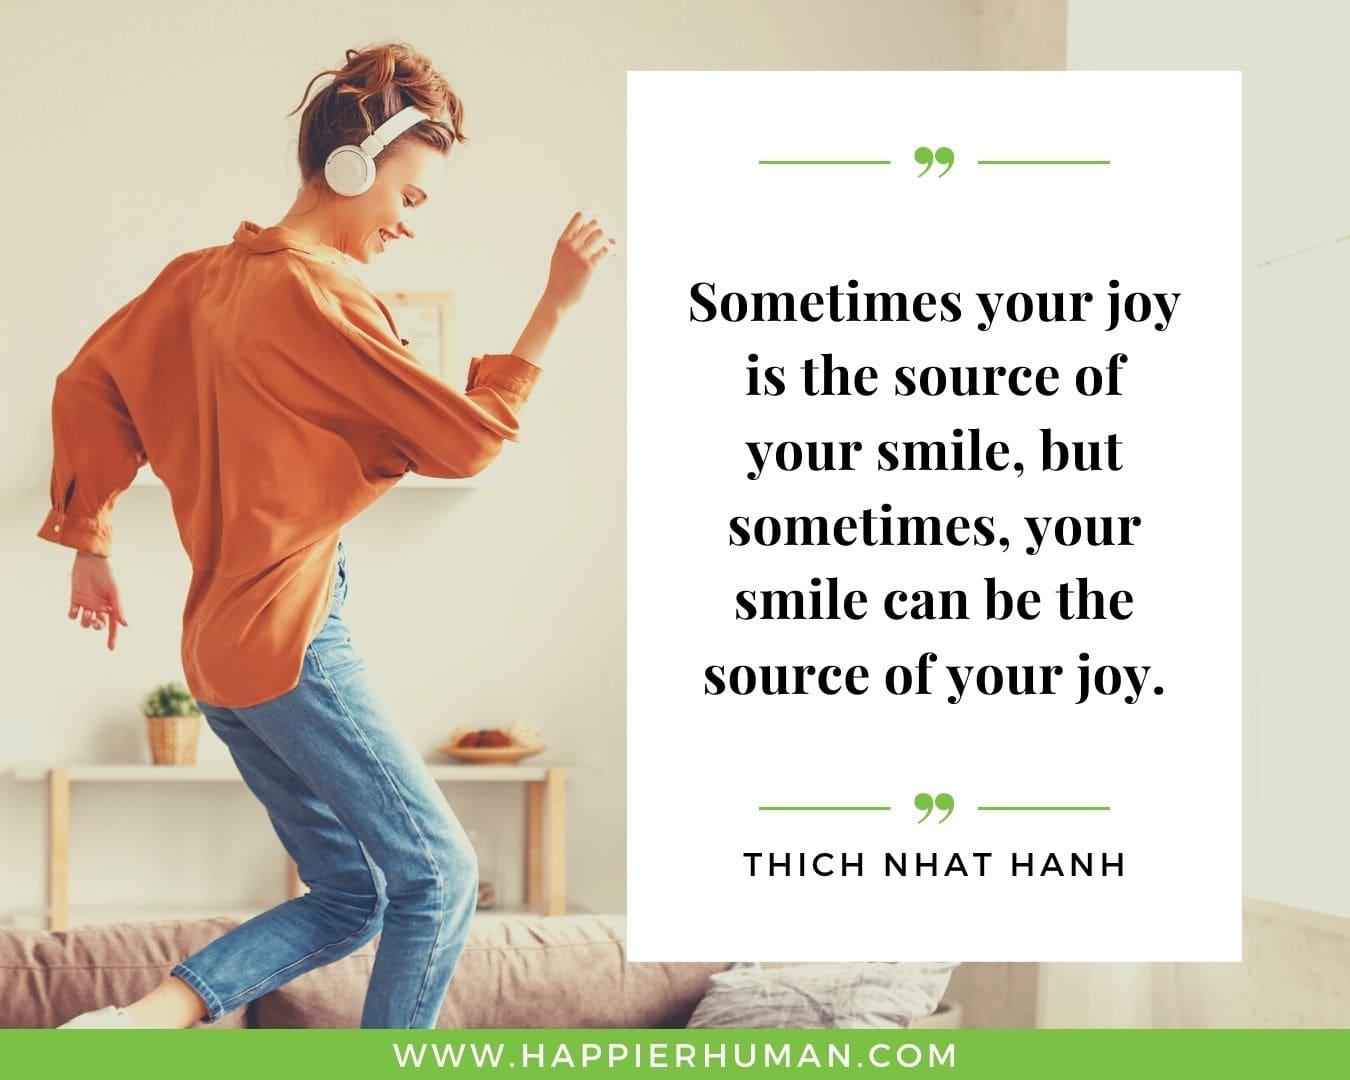 Positive Energy Quotes - “Sometimes your joy is the source of your smile, but sometimes, your smile can be the source of your joy.” - Thich Nhat Hanh